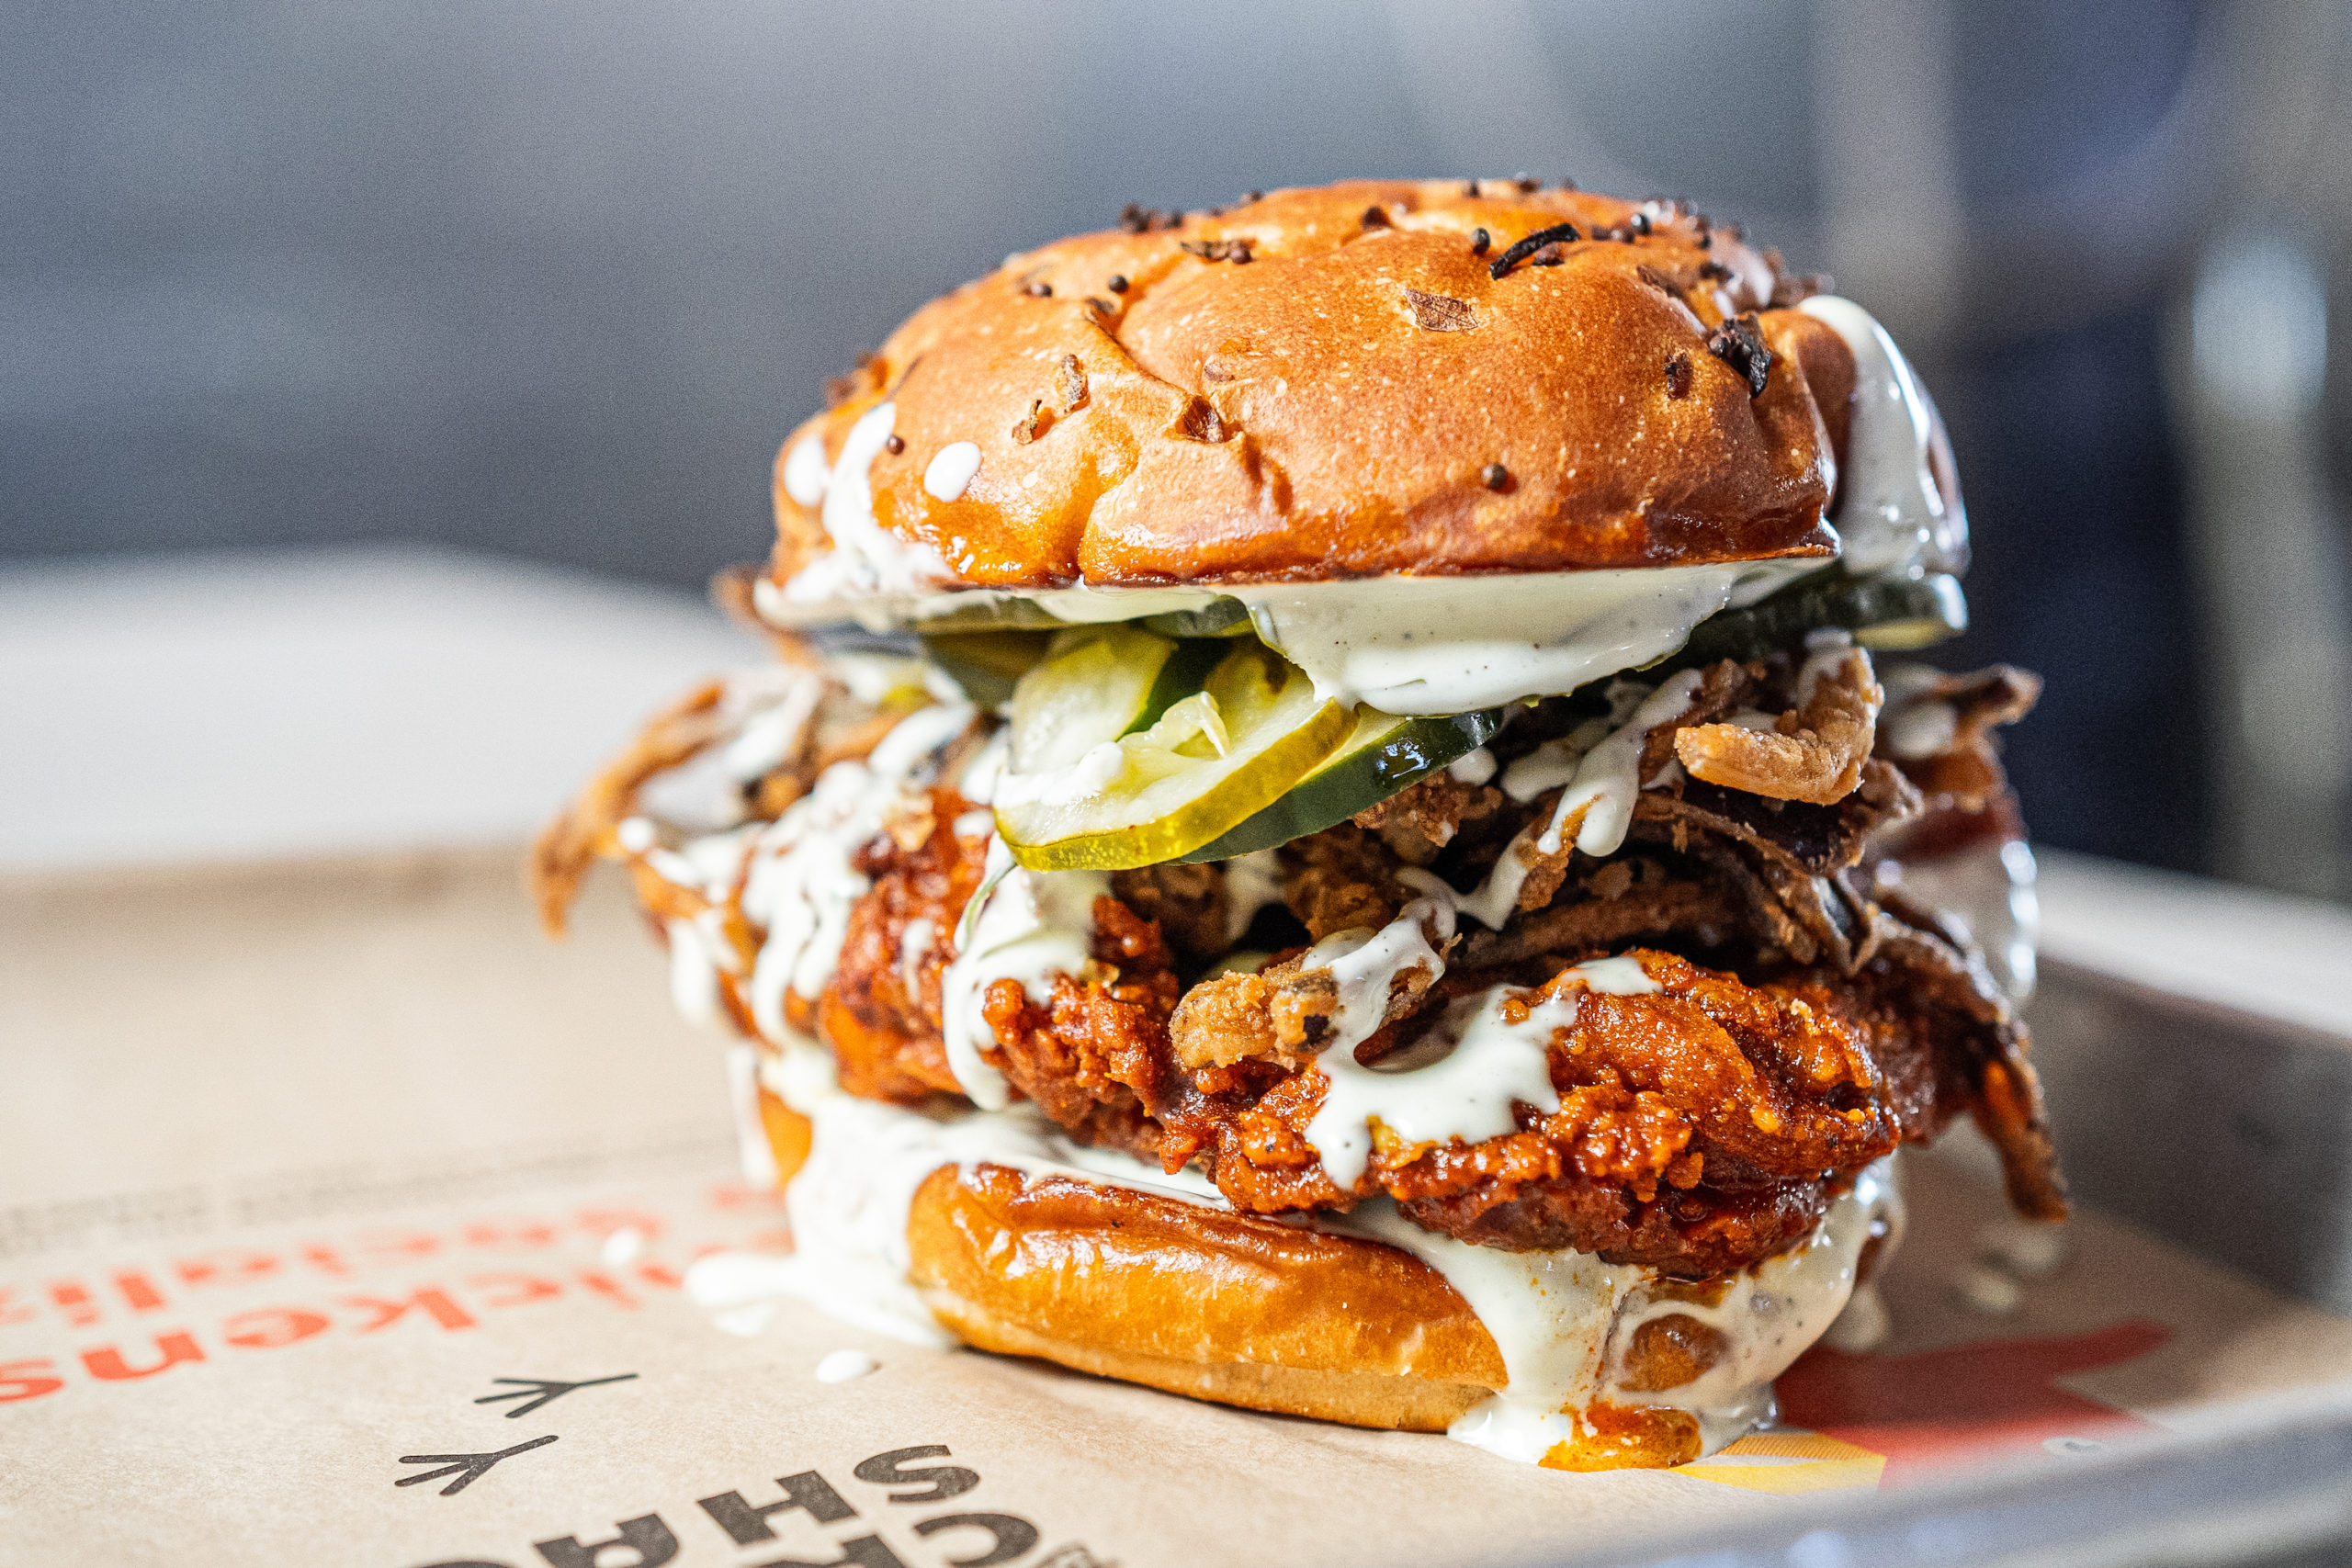 Spicy fried chicken sandwich on a tray